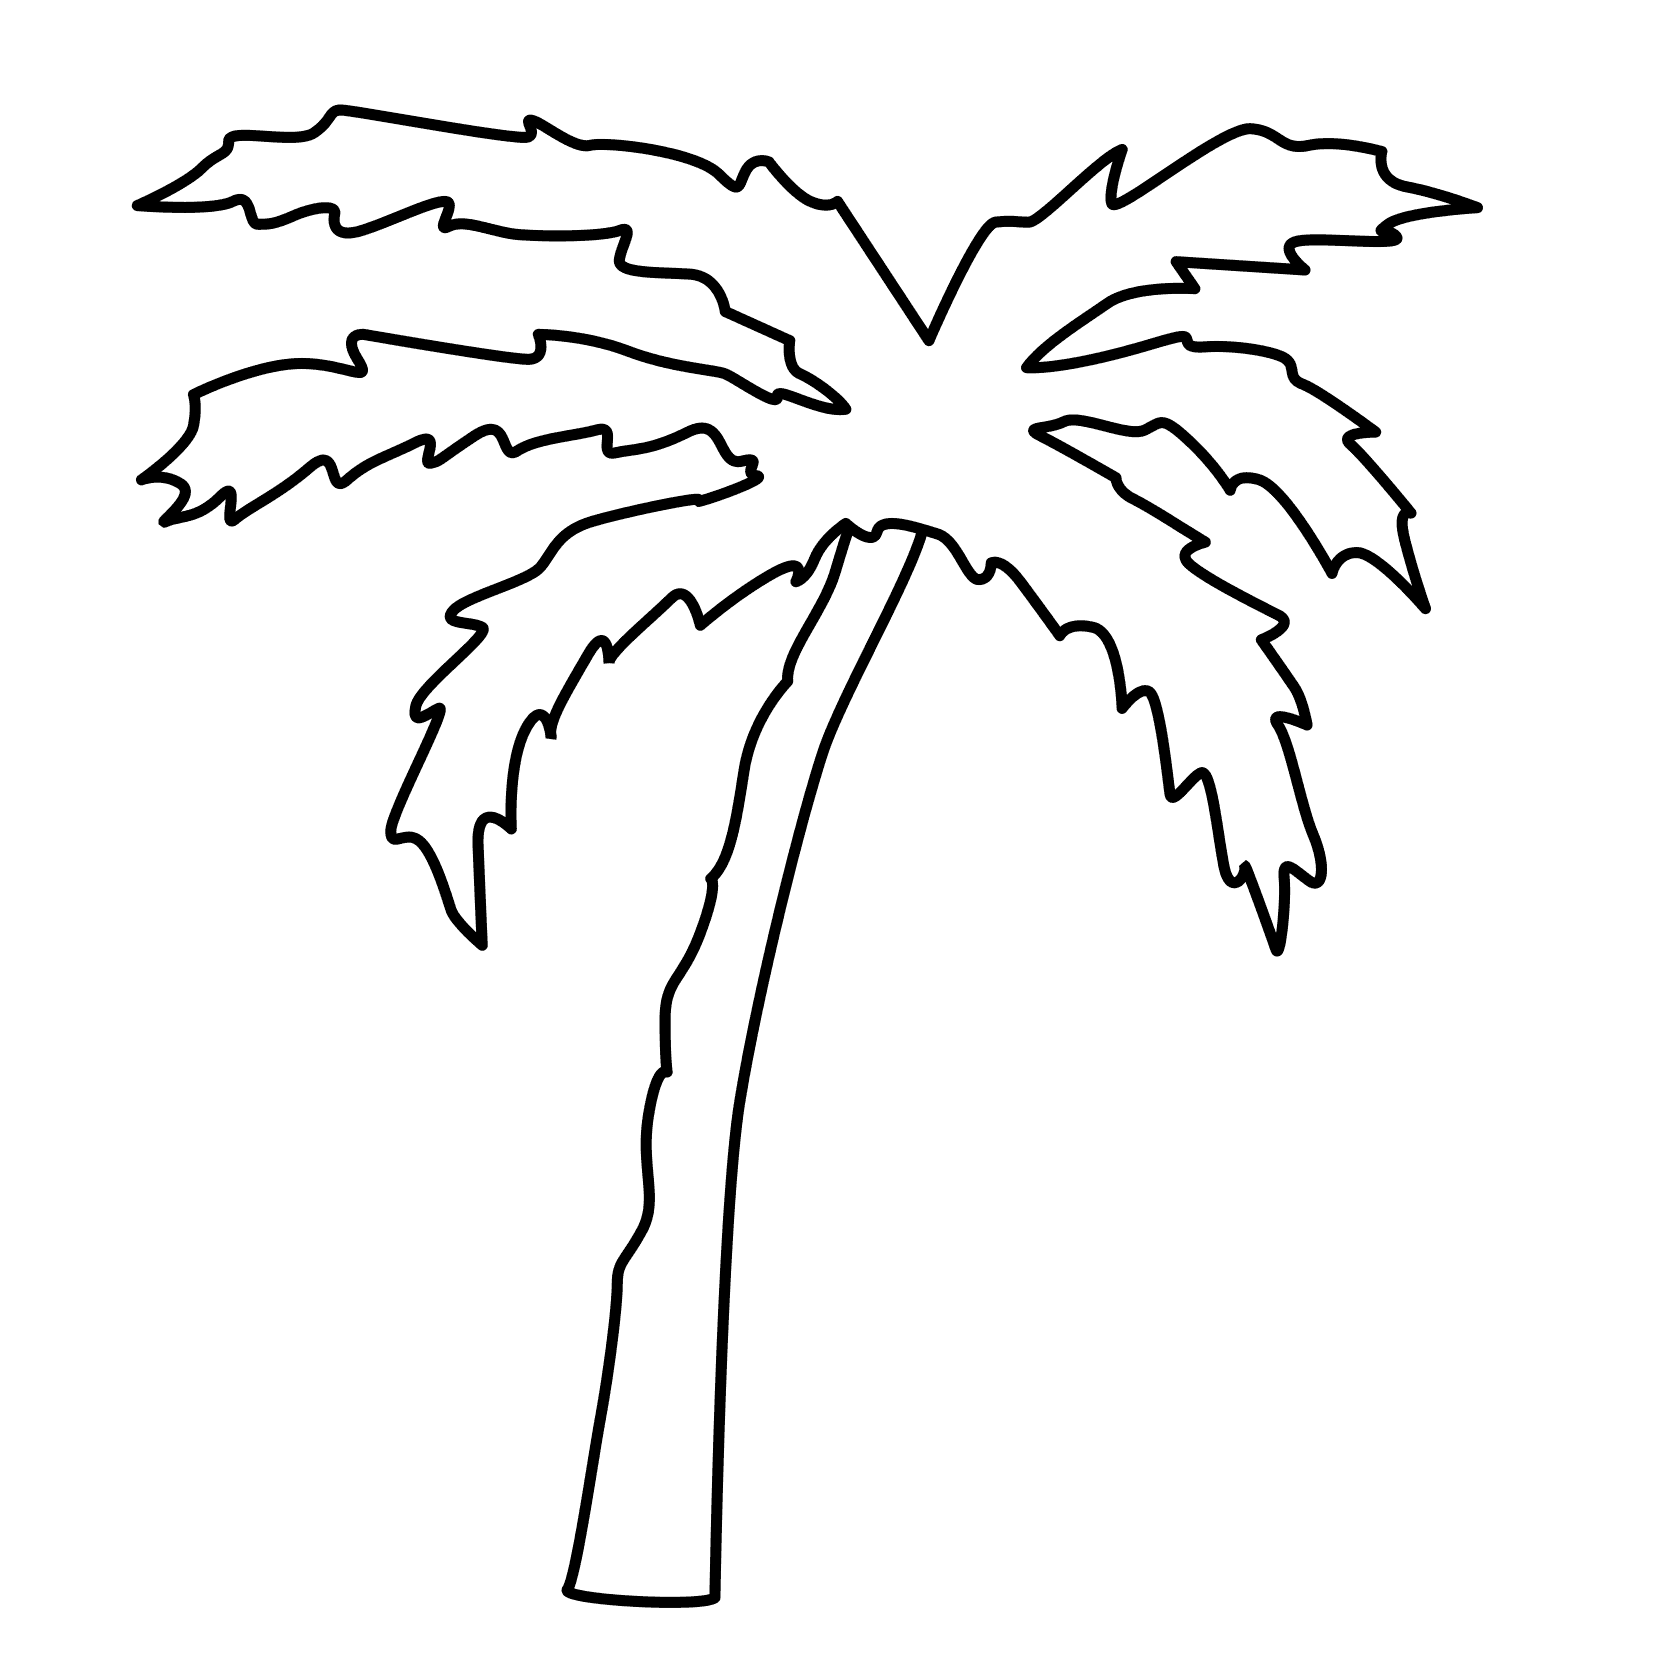 Coloring pages trees and leaves- free downloads